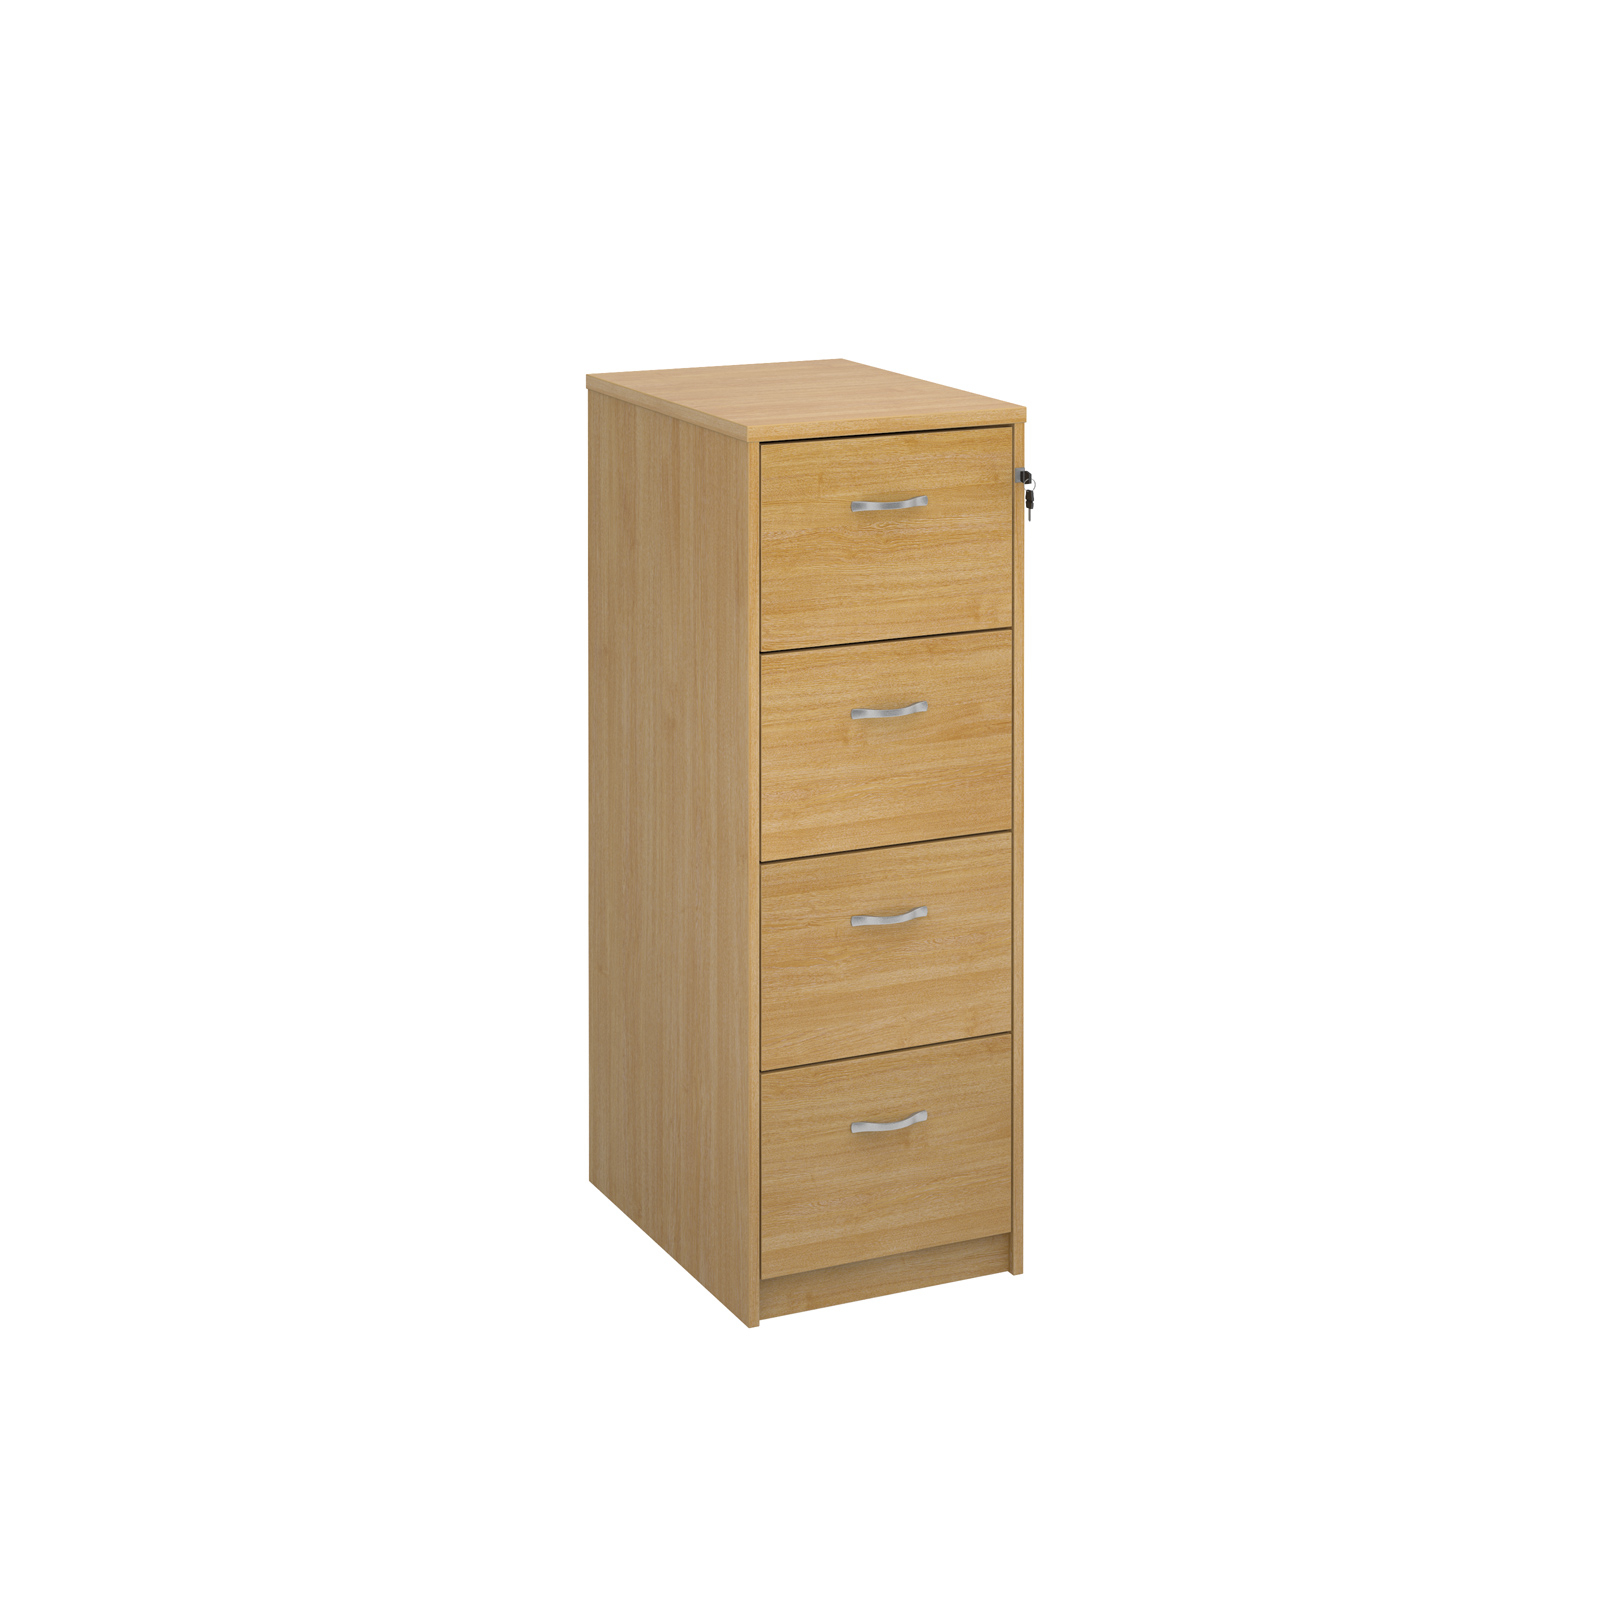 Dams 4 Drawer Wooden Filing Cabinet With Chrome Handles Oak James pertaining to size 1600 X 1600